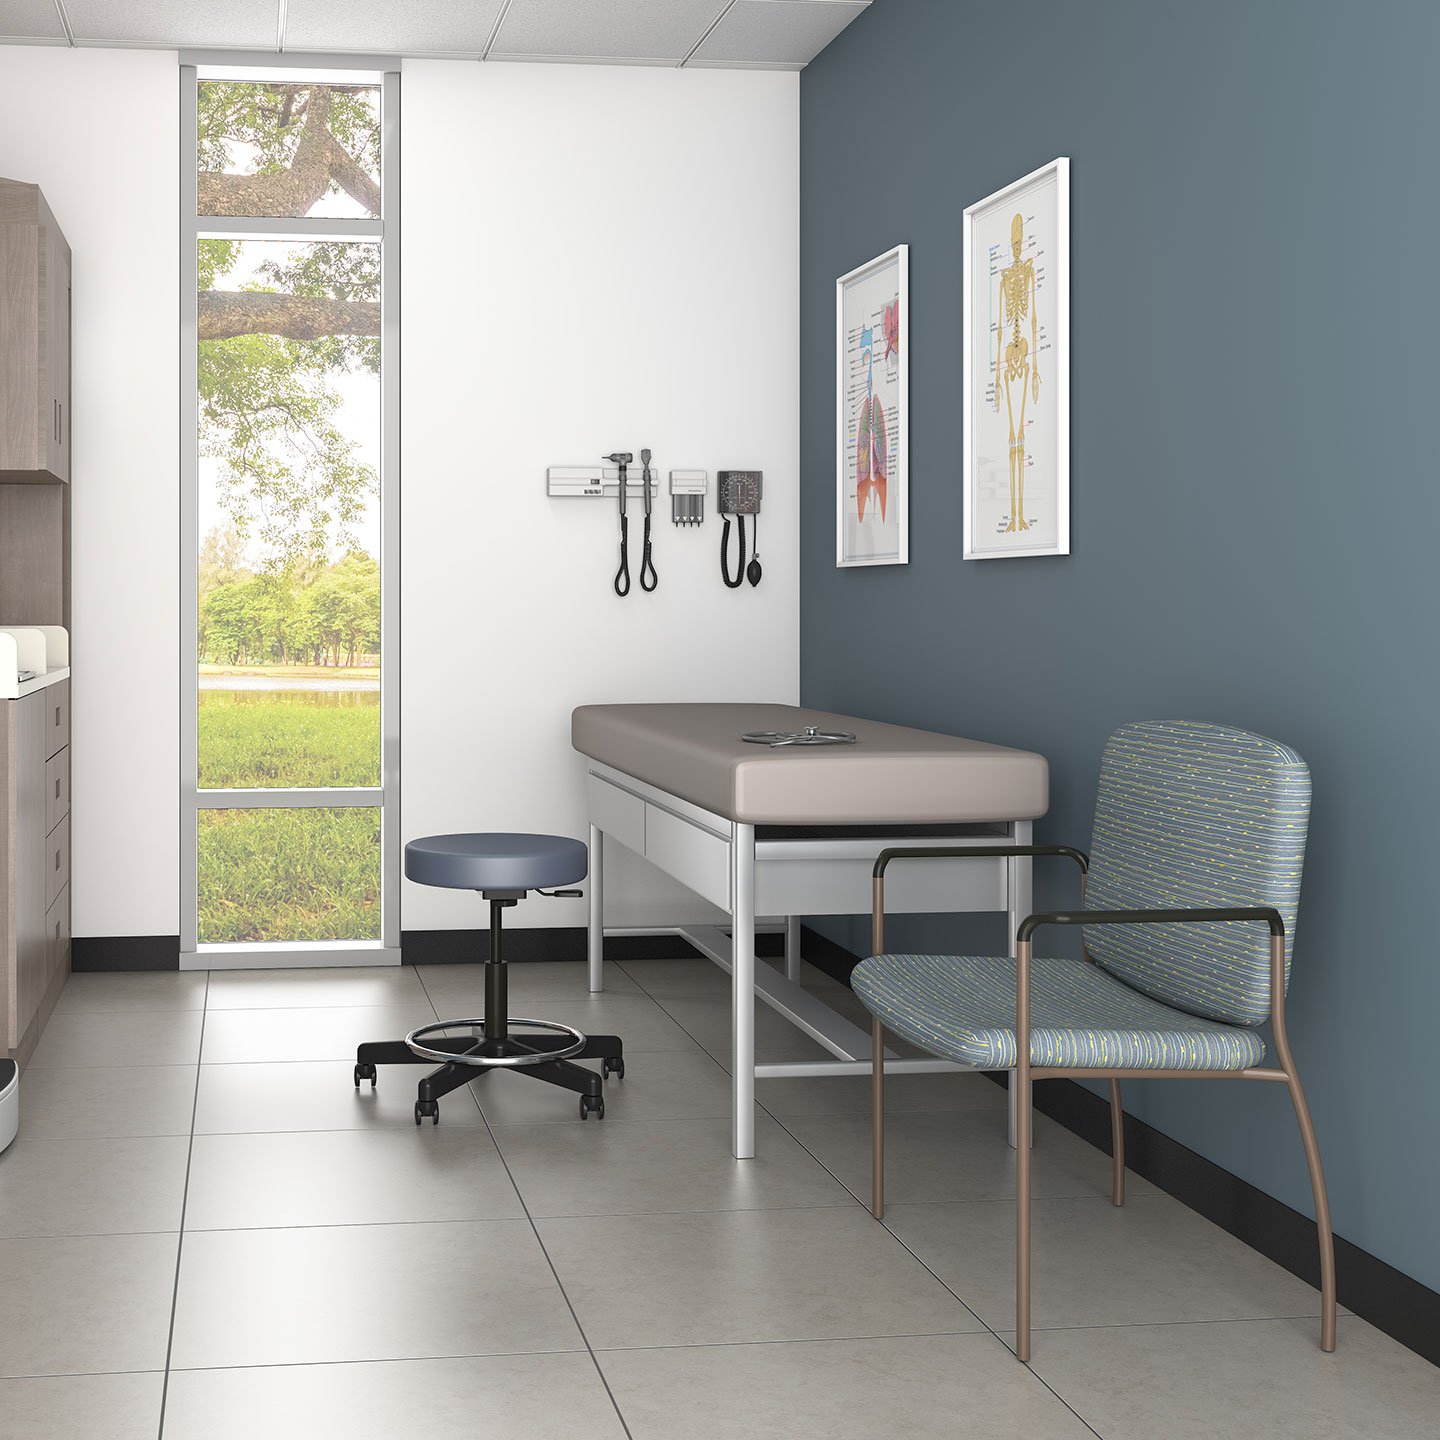 Haworth Exam stool in dark grey seating being used in a patient examination room